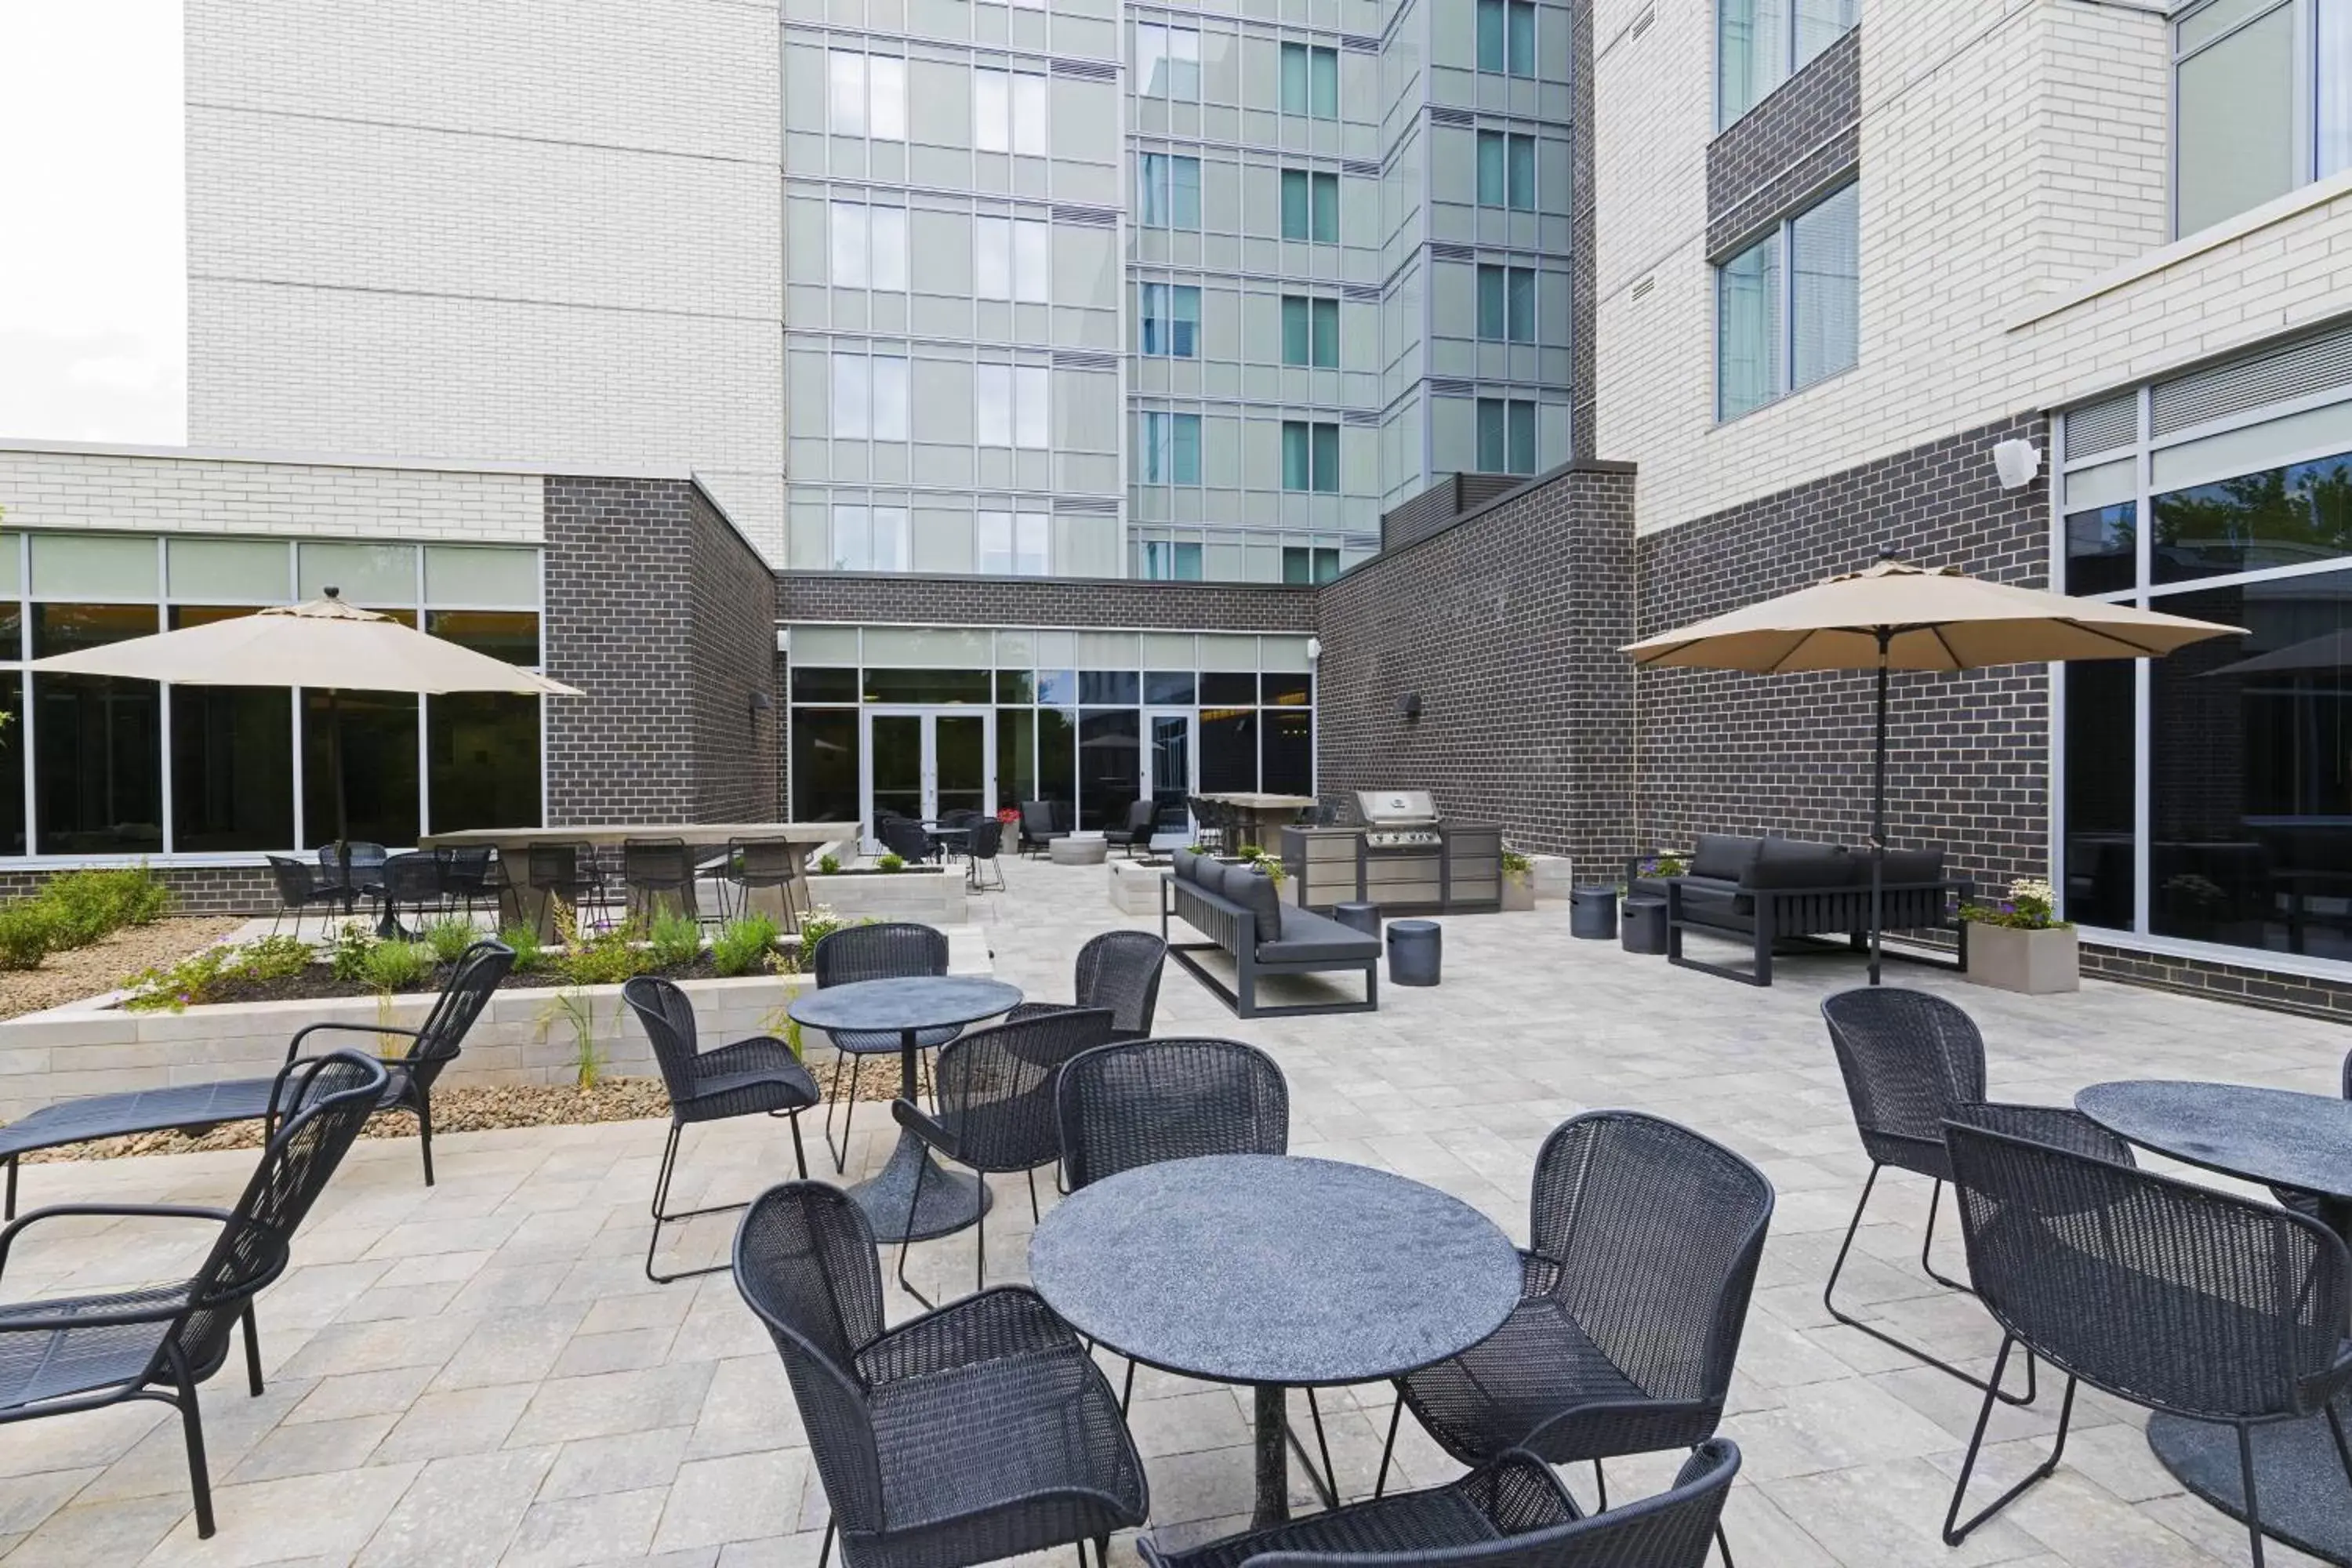 Property building in Courtyard by Marriott Halifax Dartmouth